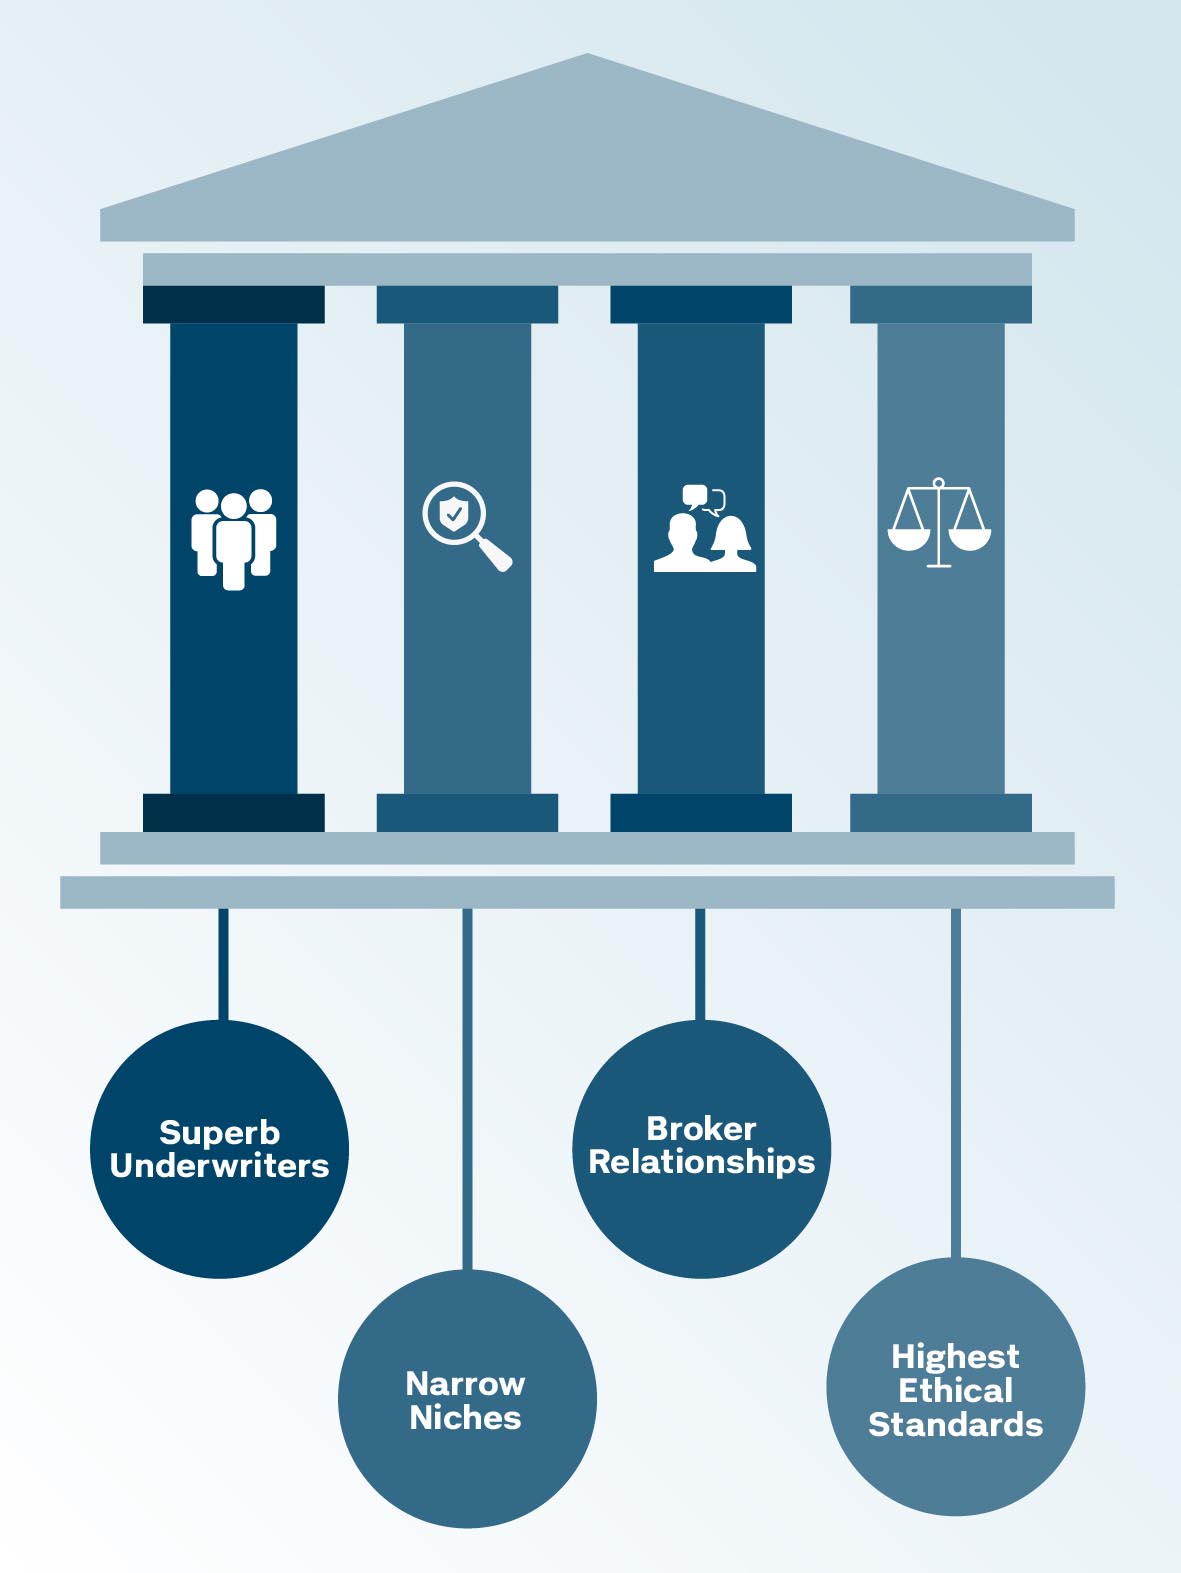 Diagram of the four pillars of the Euclid Partner Model including Superb Underwriters, Narrow Niches, Broker Relationships, and Highest Ethical Standards.